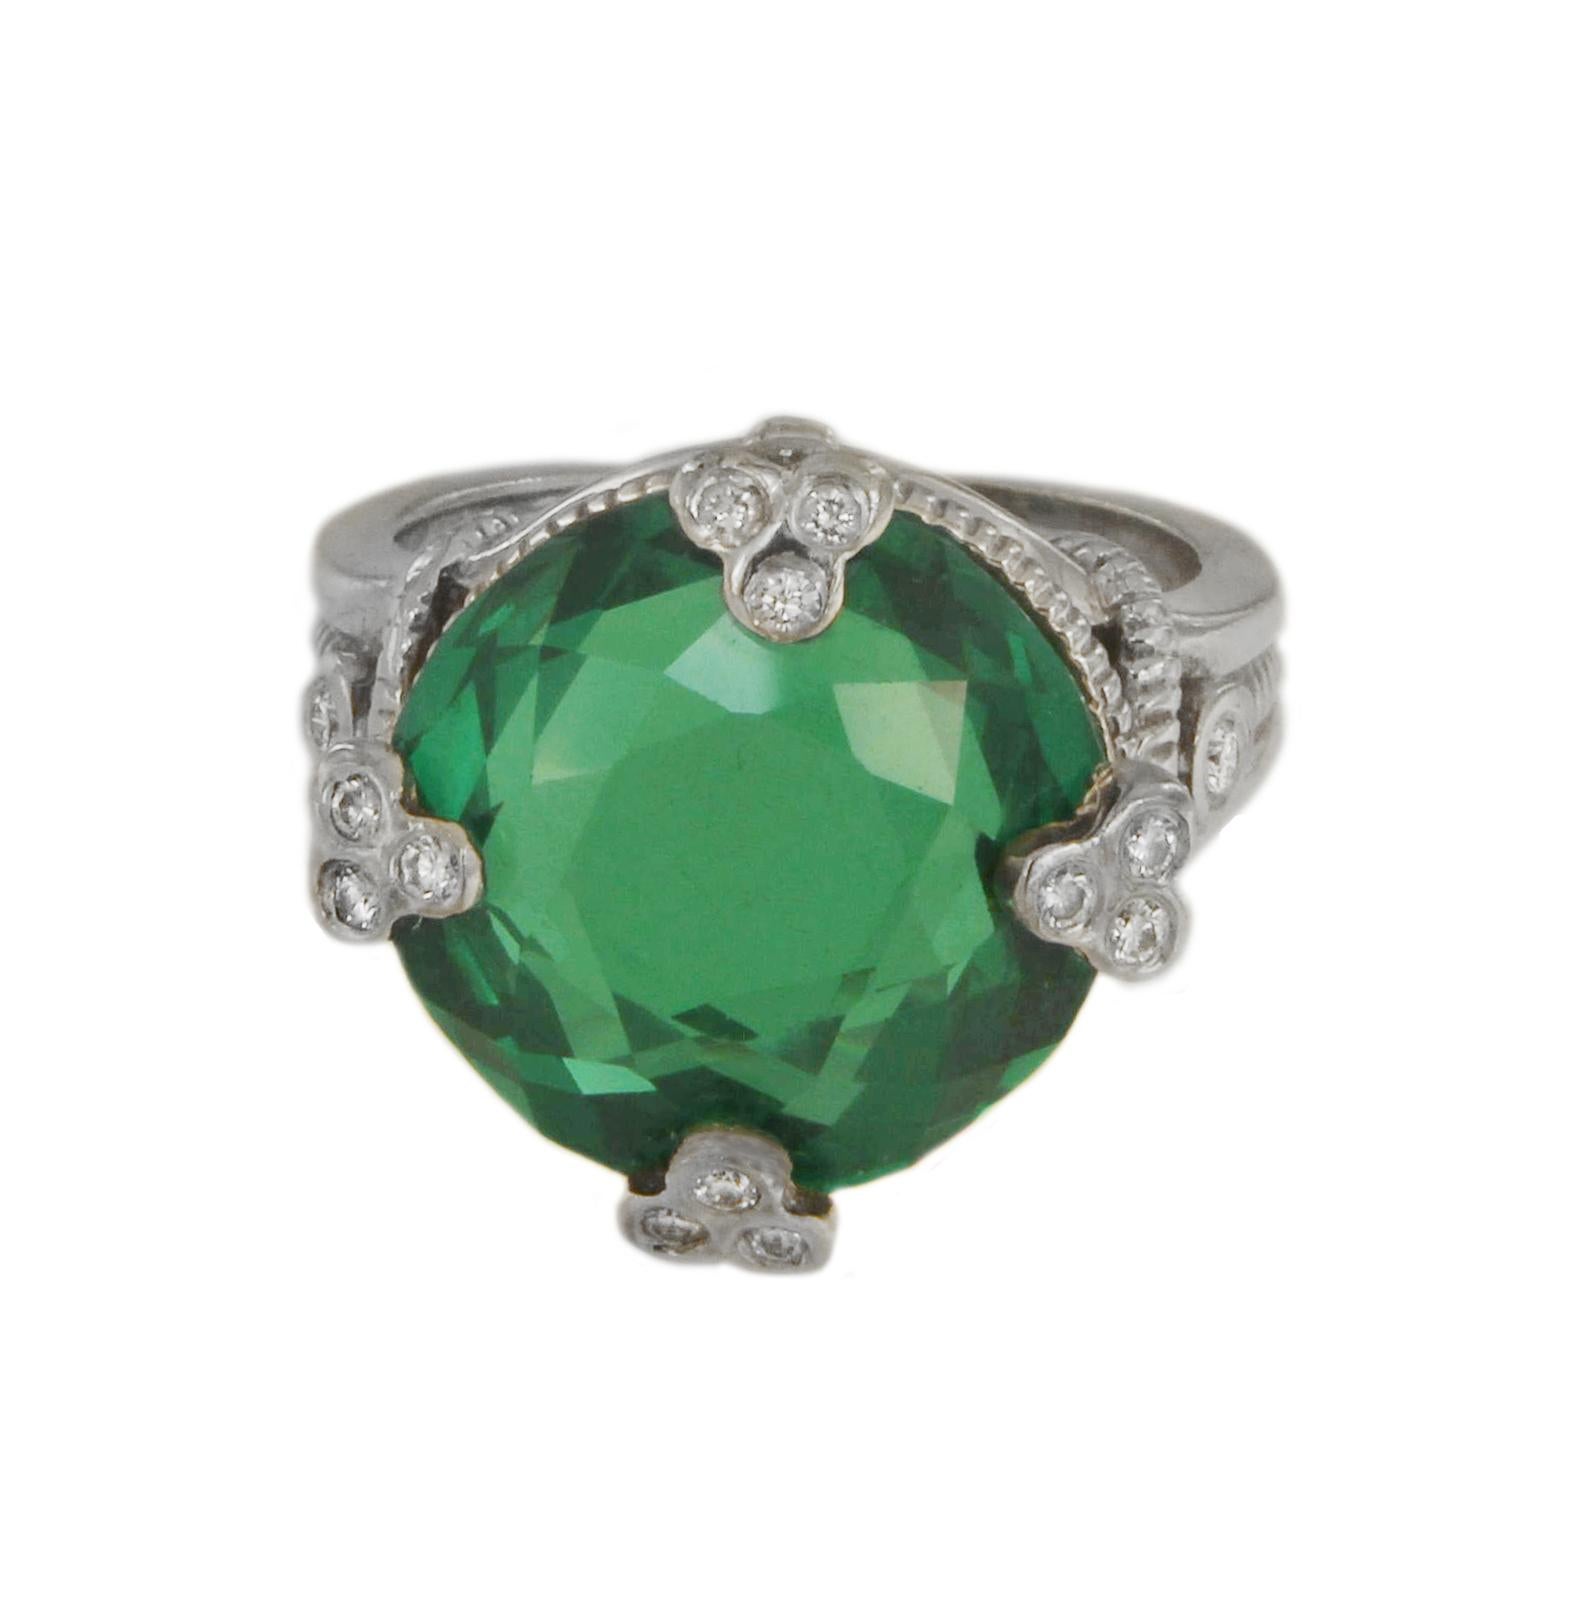 JUDITH RIPKA GREEN QUARTZ IN 14K WHITE GOLD RING WITH DIAMONDS.

-Good condition, minor scratches on the stone
-14k white gold
-Ring size: 6.25
-Green quartz diameter: 15mm
-Diamonds are used as accents

Original Retail: $5500